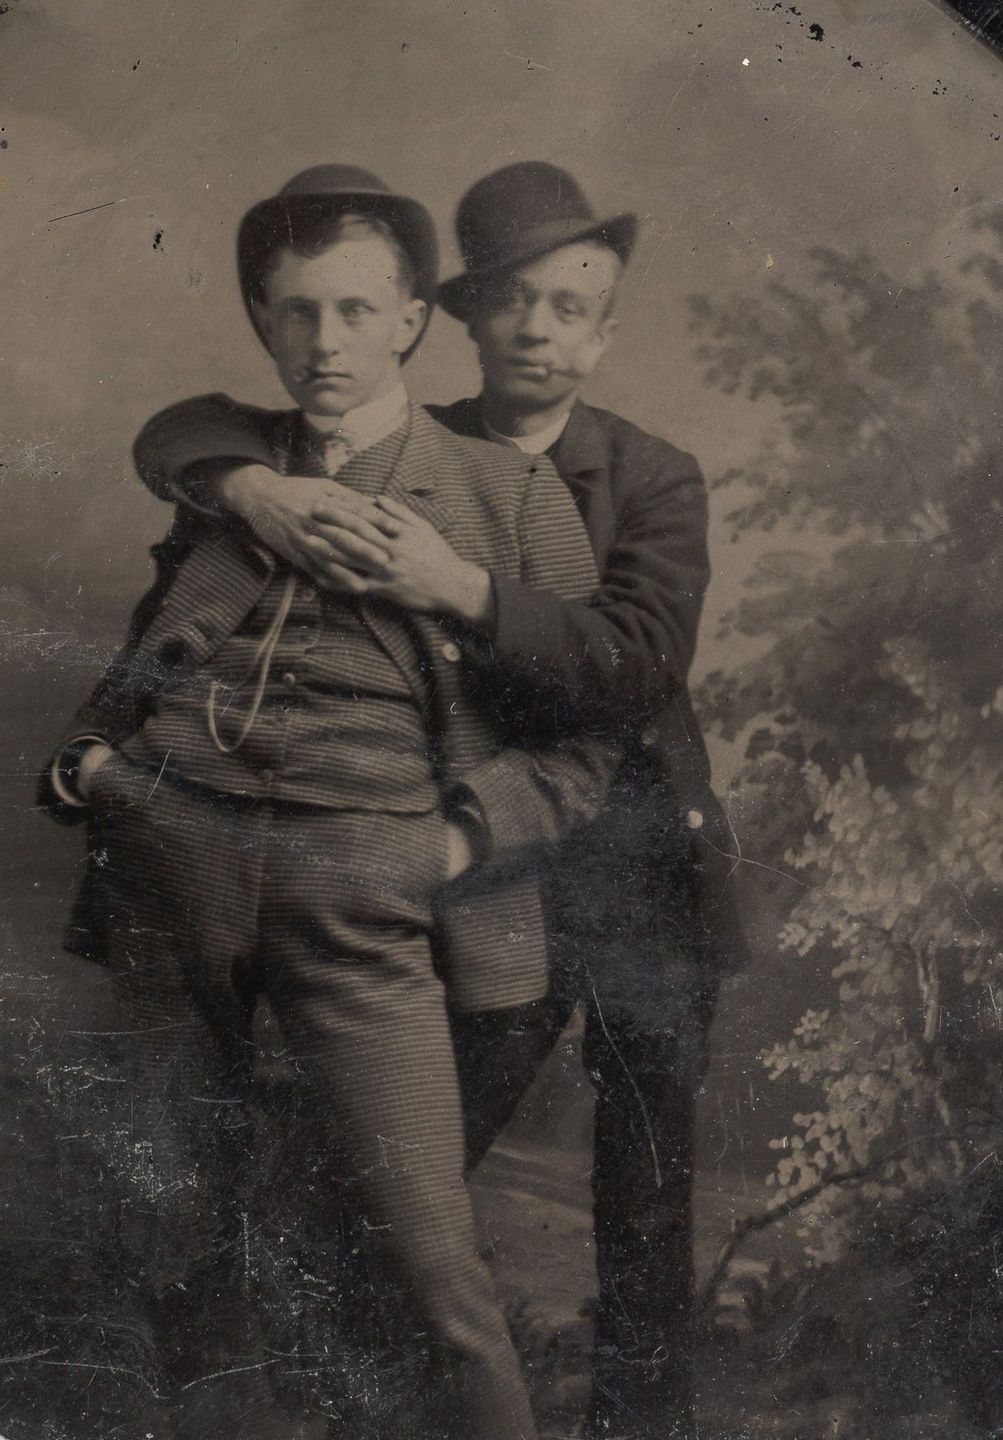 Rare Photos Capture Victorian Men Holding Hands, Sitting on Each Other